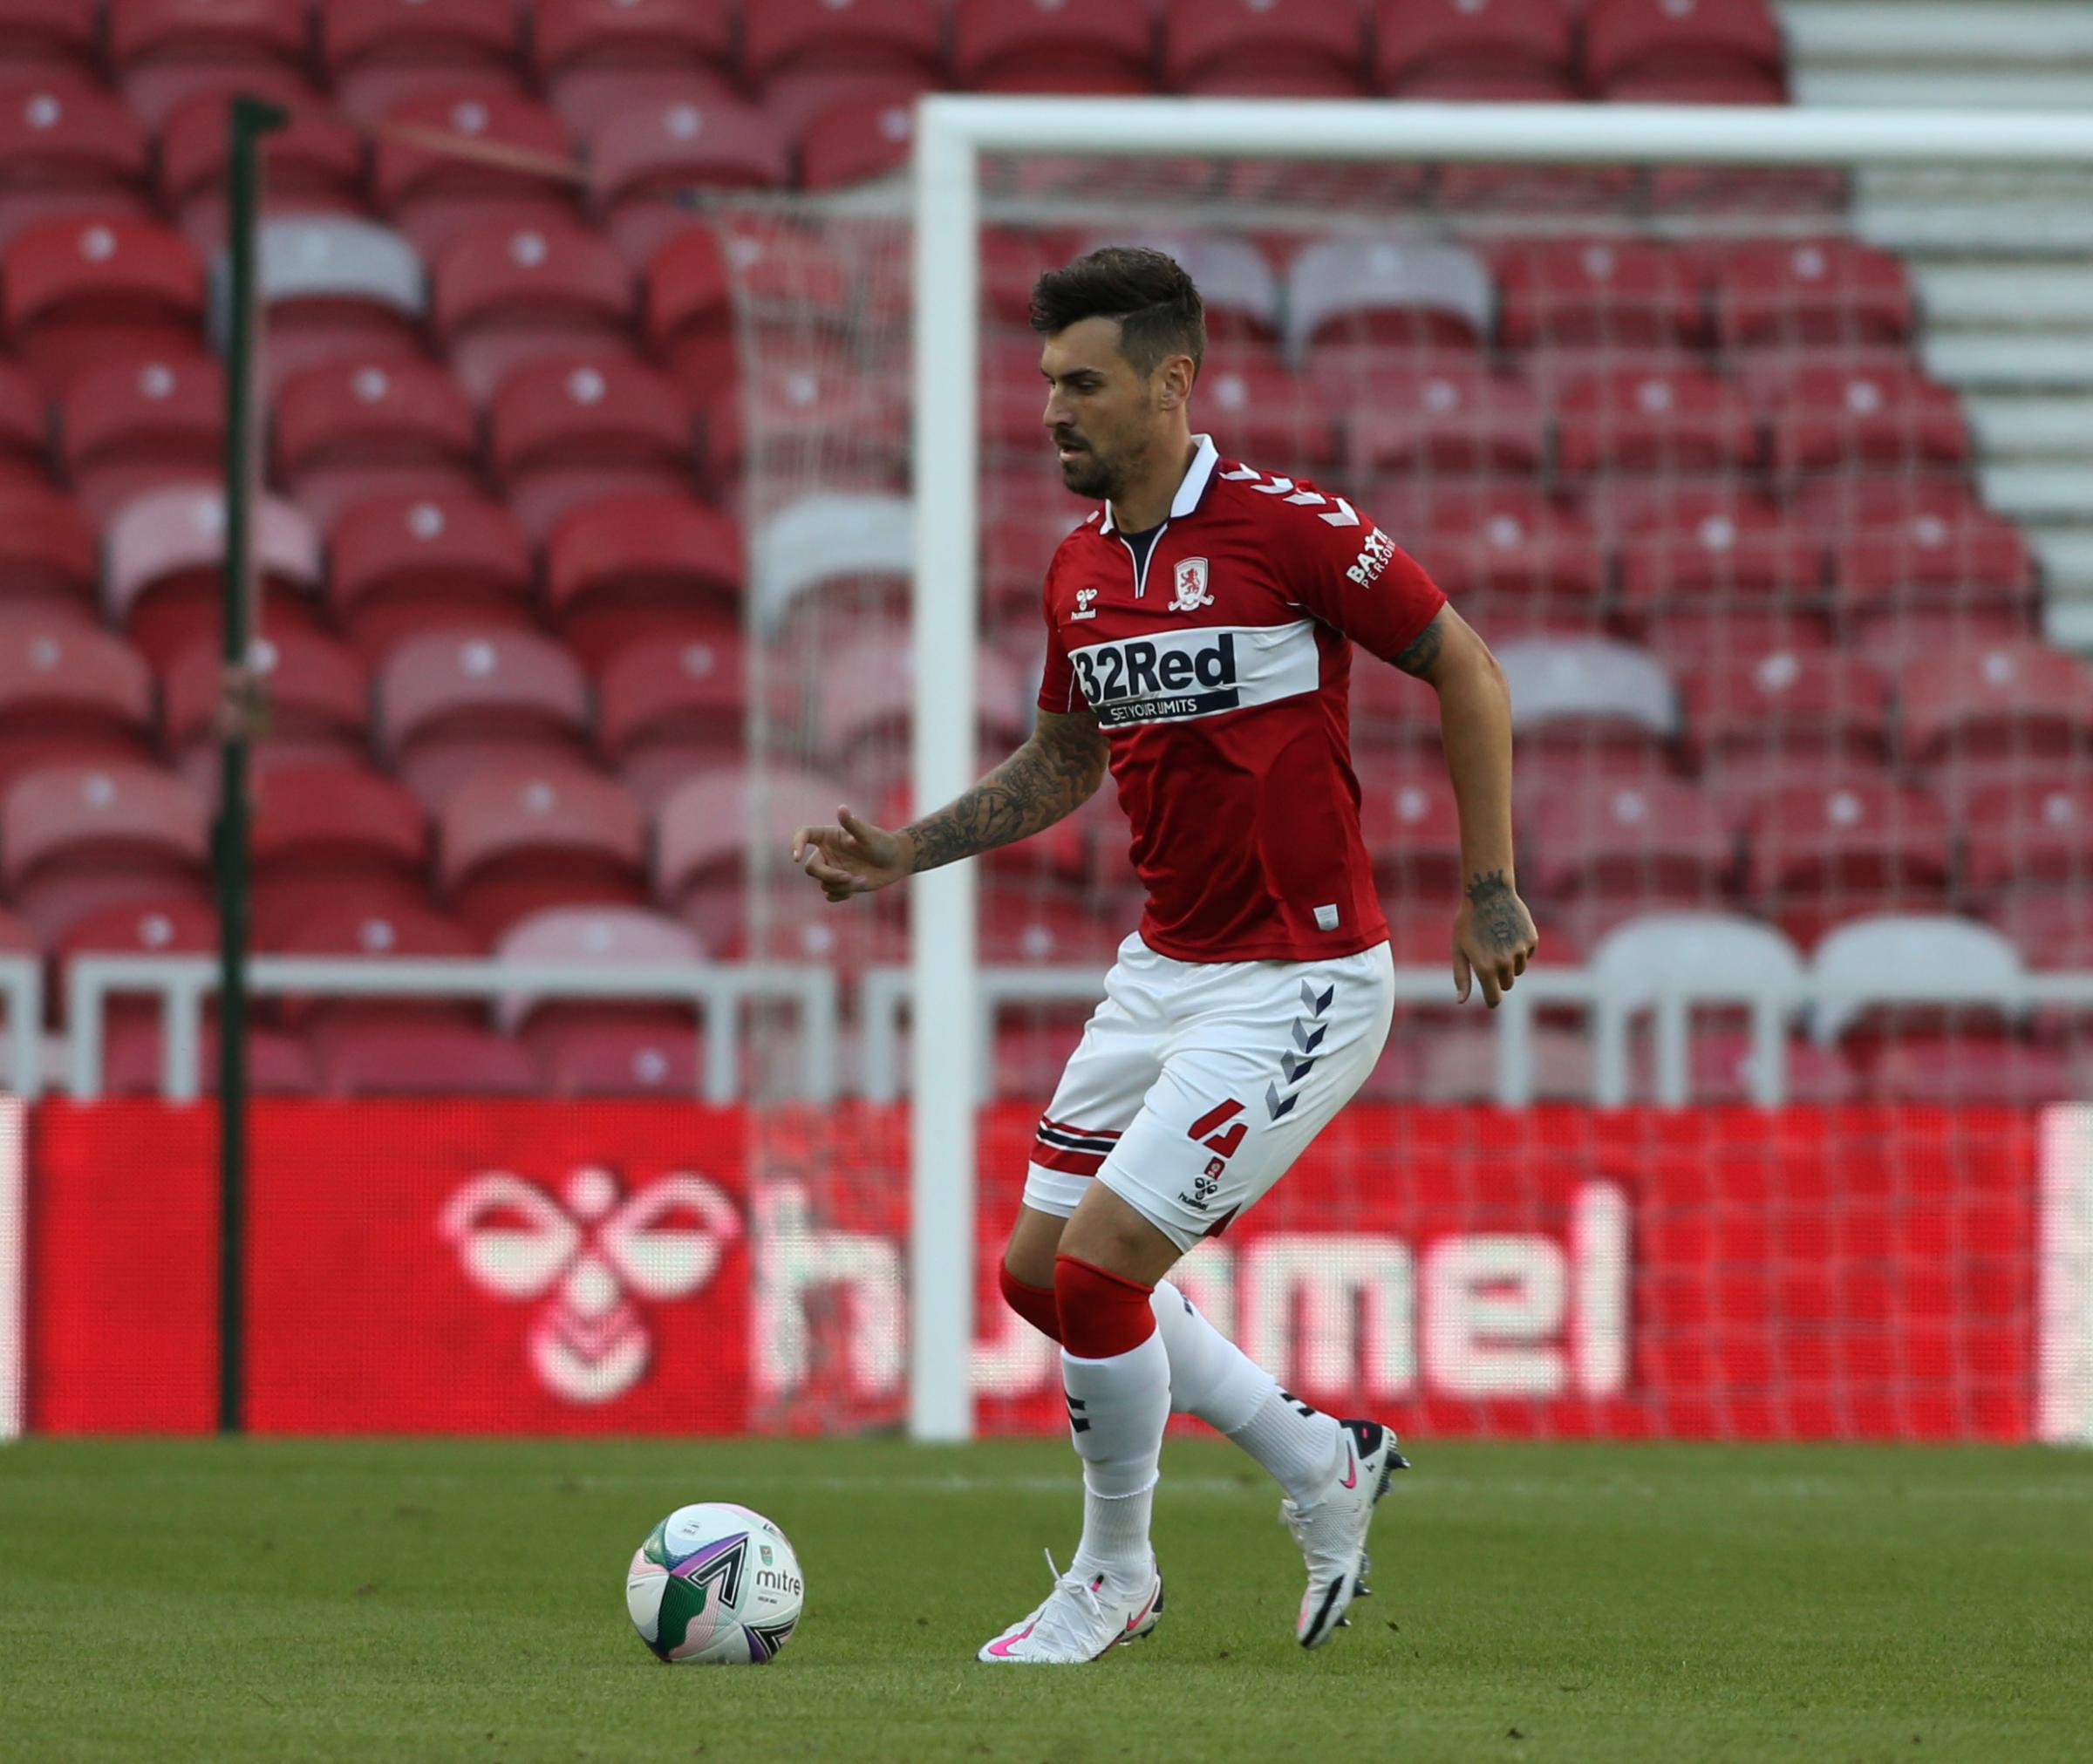 Boro make four changes for West Brom trip as Grant Hall returns